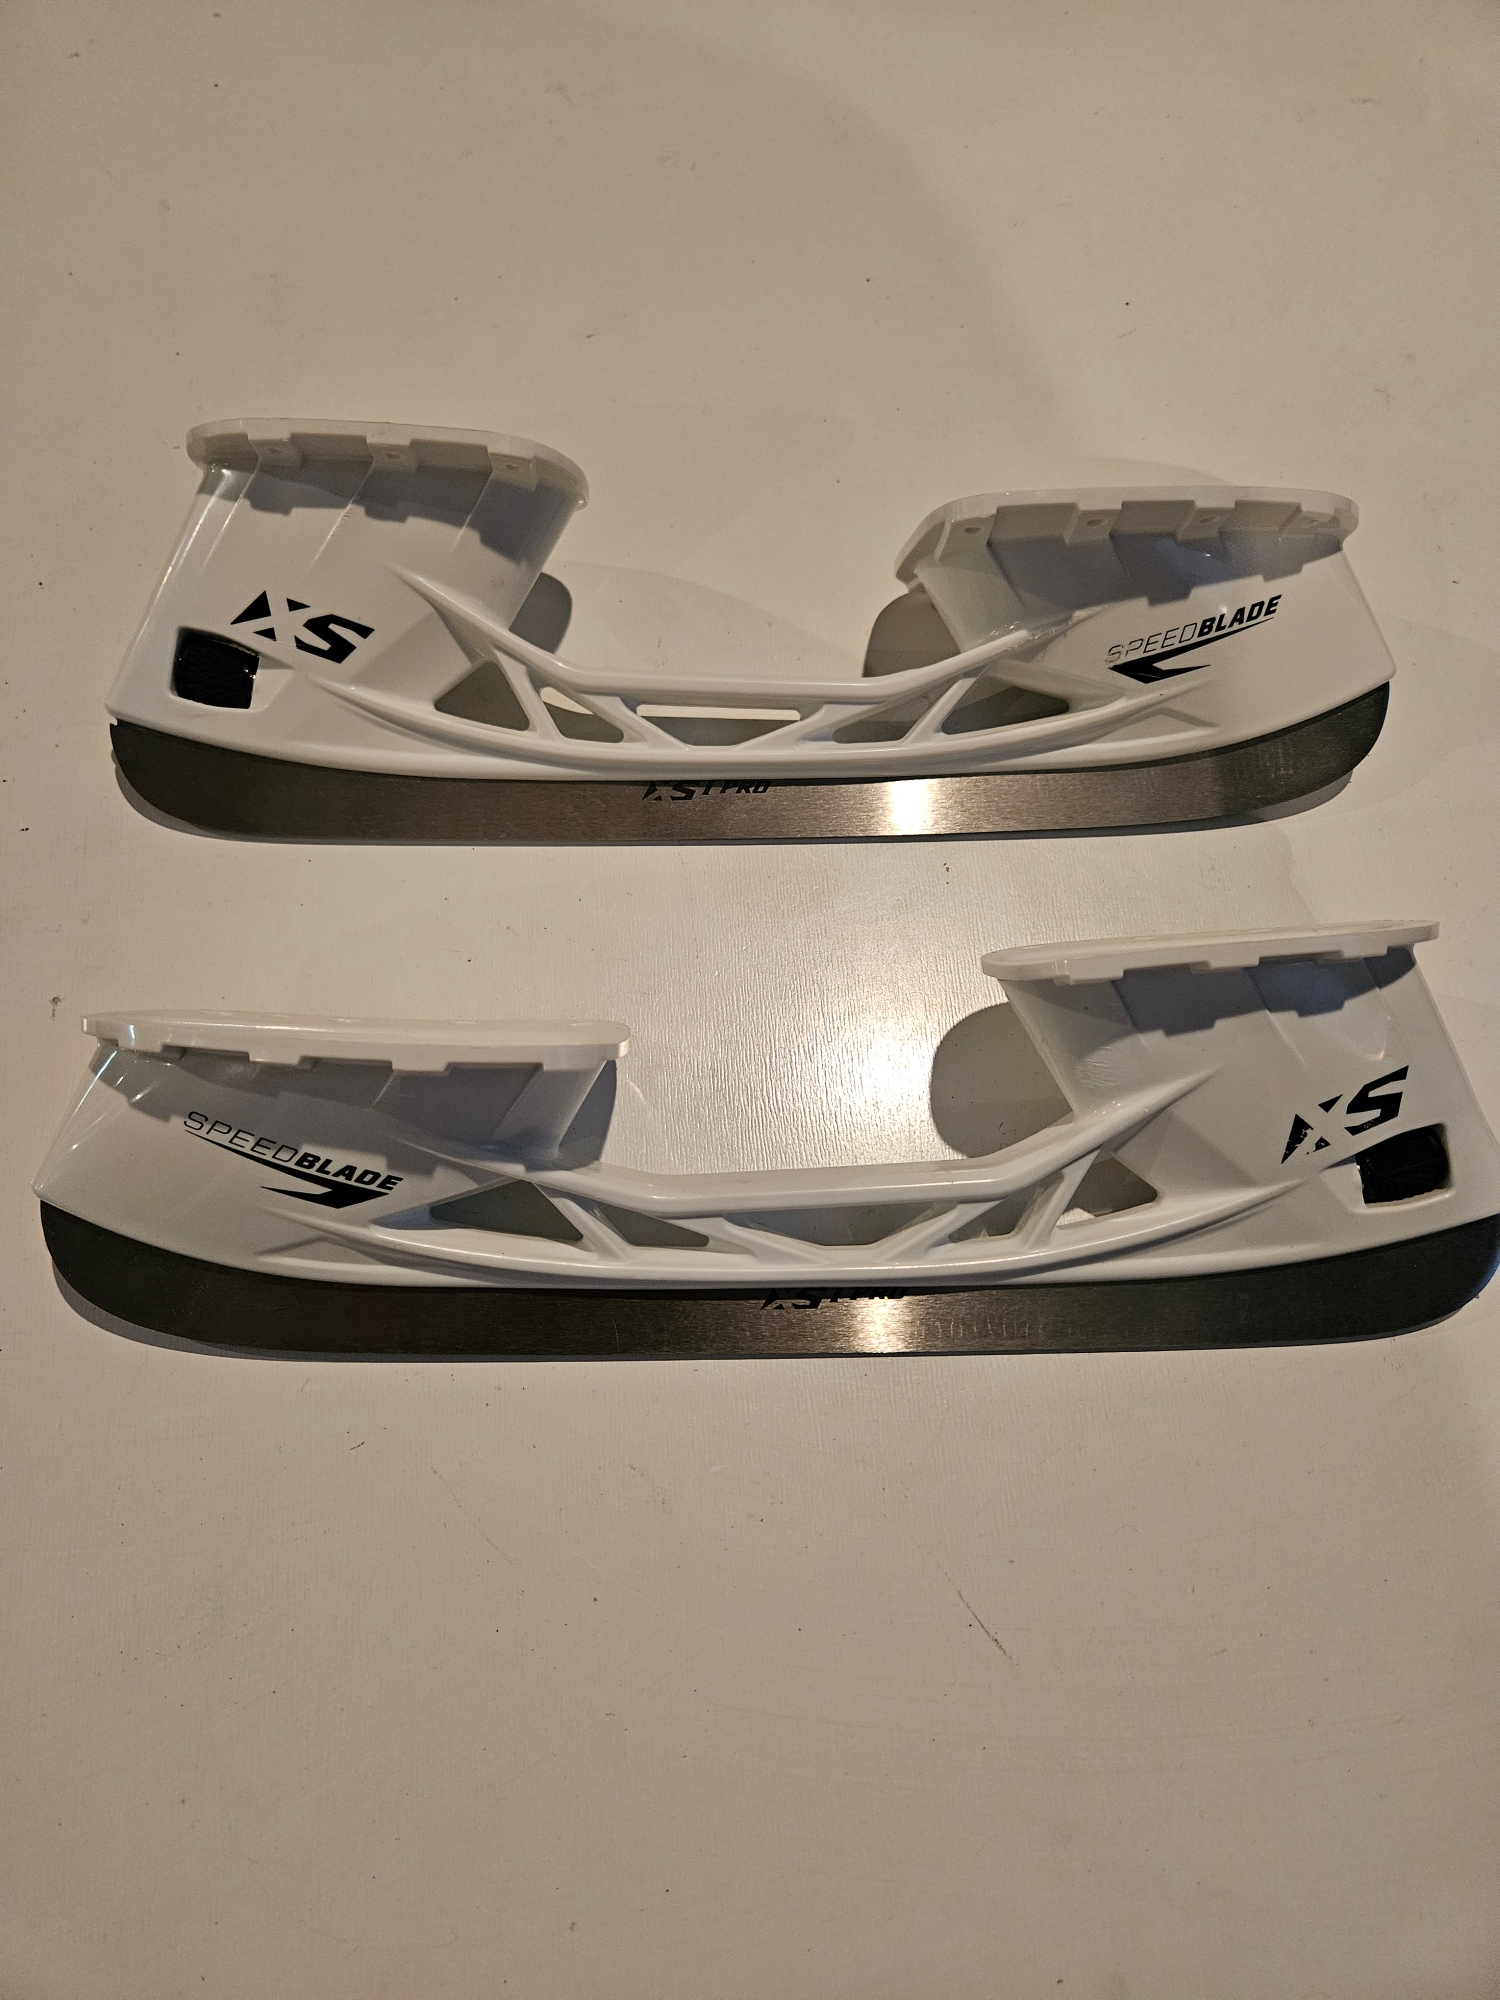 New Pair - CCM SpeedBlade XS 287 mm Holders with Steel